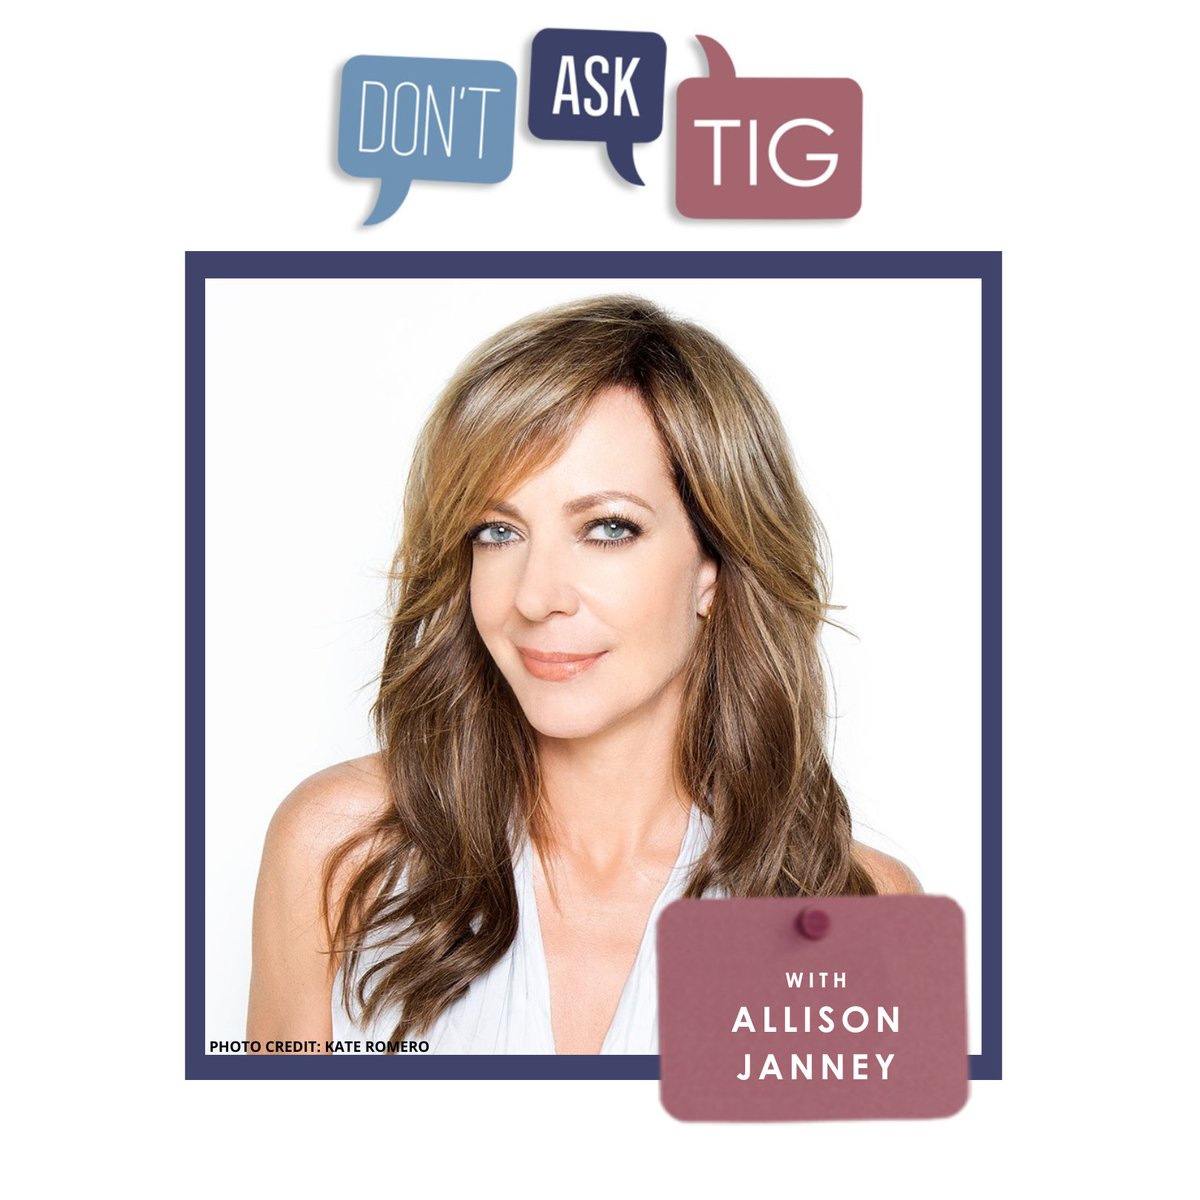 💯 It’s our 100th episode!!! @AllisonBJanney & @TigNotaro recount a fateful trip on a party bus. Then Allison sings, does her best Minnesotan accent, and tells the story of a dodgeball incident involving @Harry_Styles. Listen at DontAskTig.org or your fave podcast app!